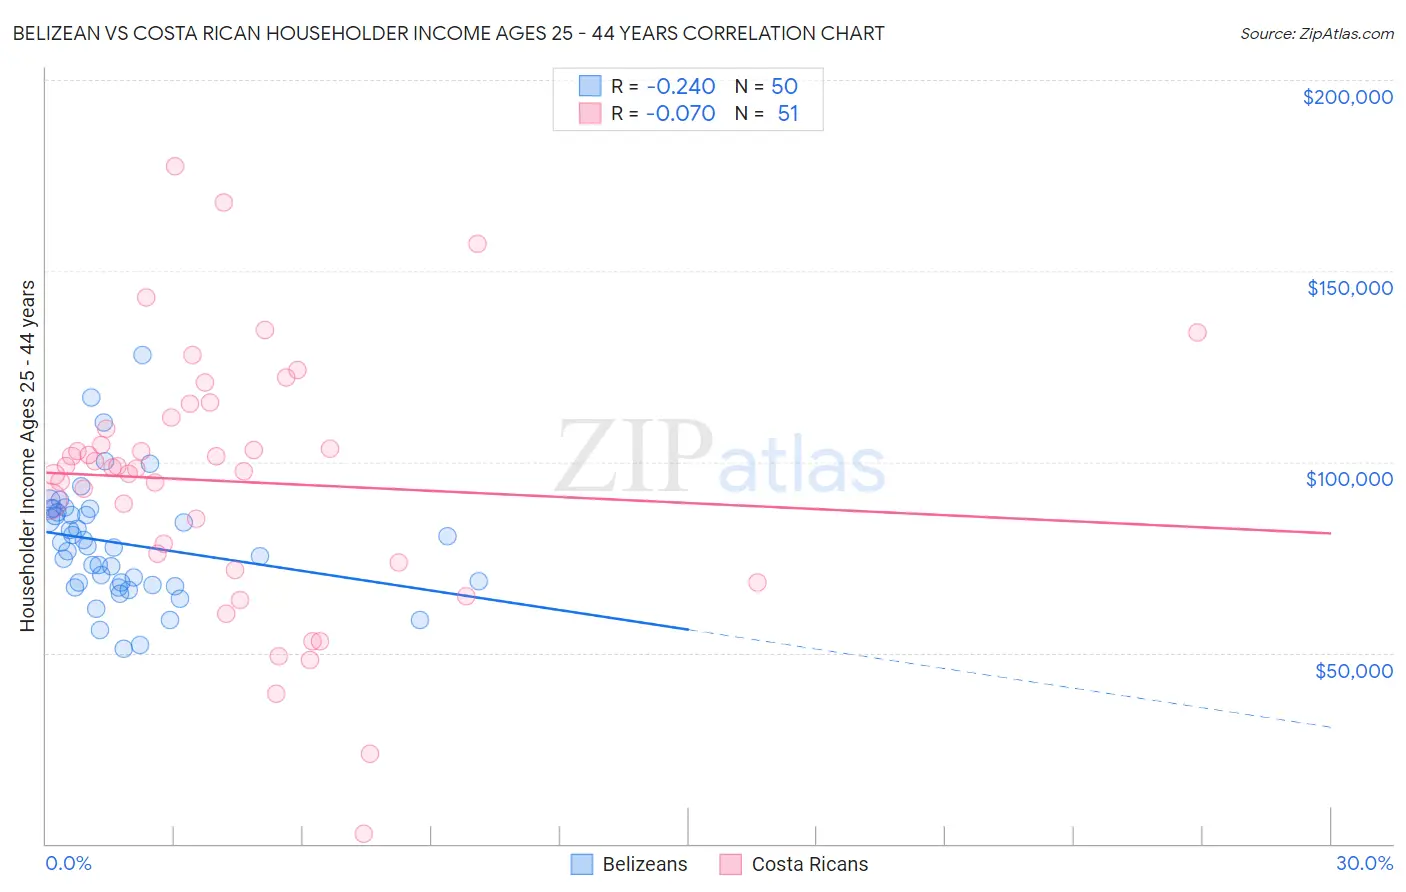 Belizean vs Costa Rican Householder Income Ages 25 - 44 years